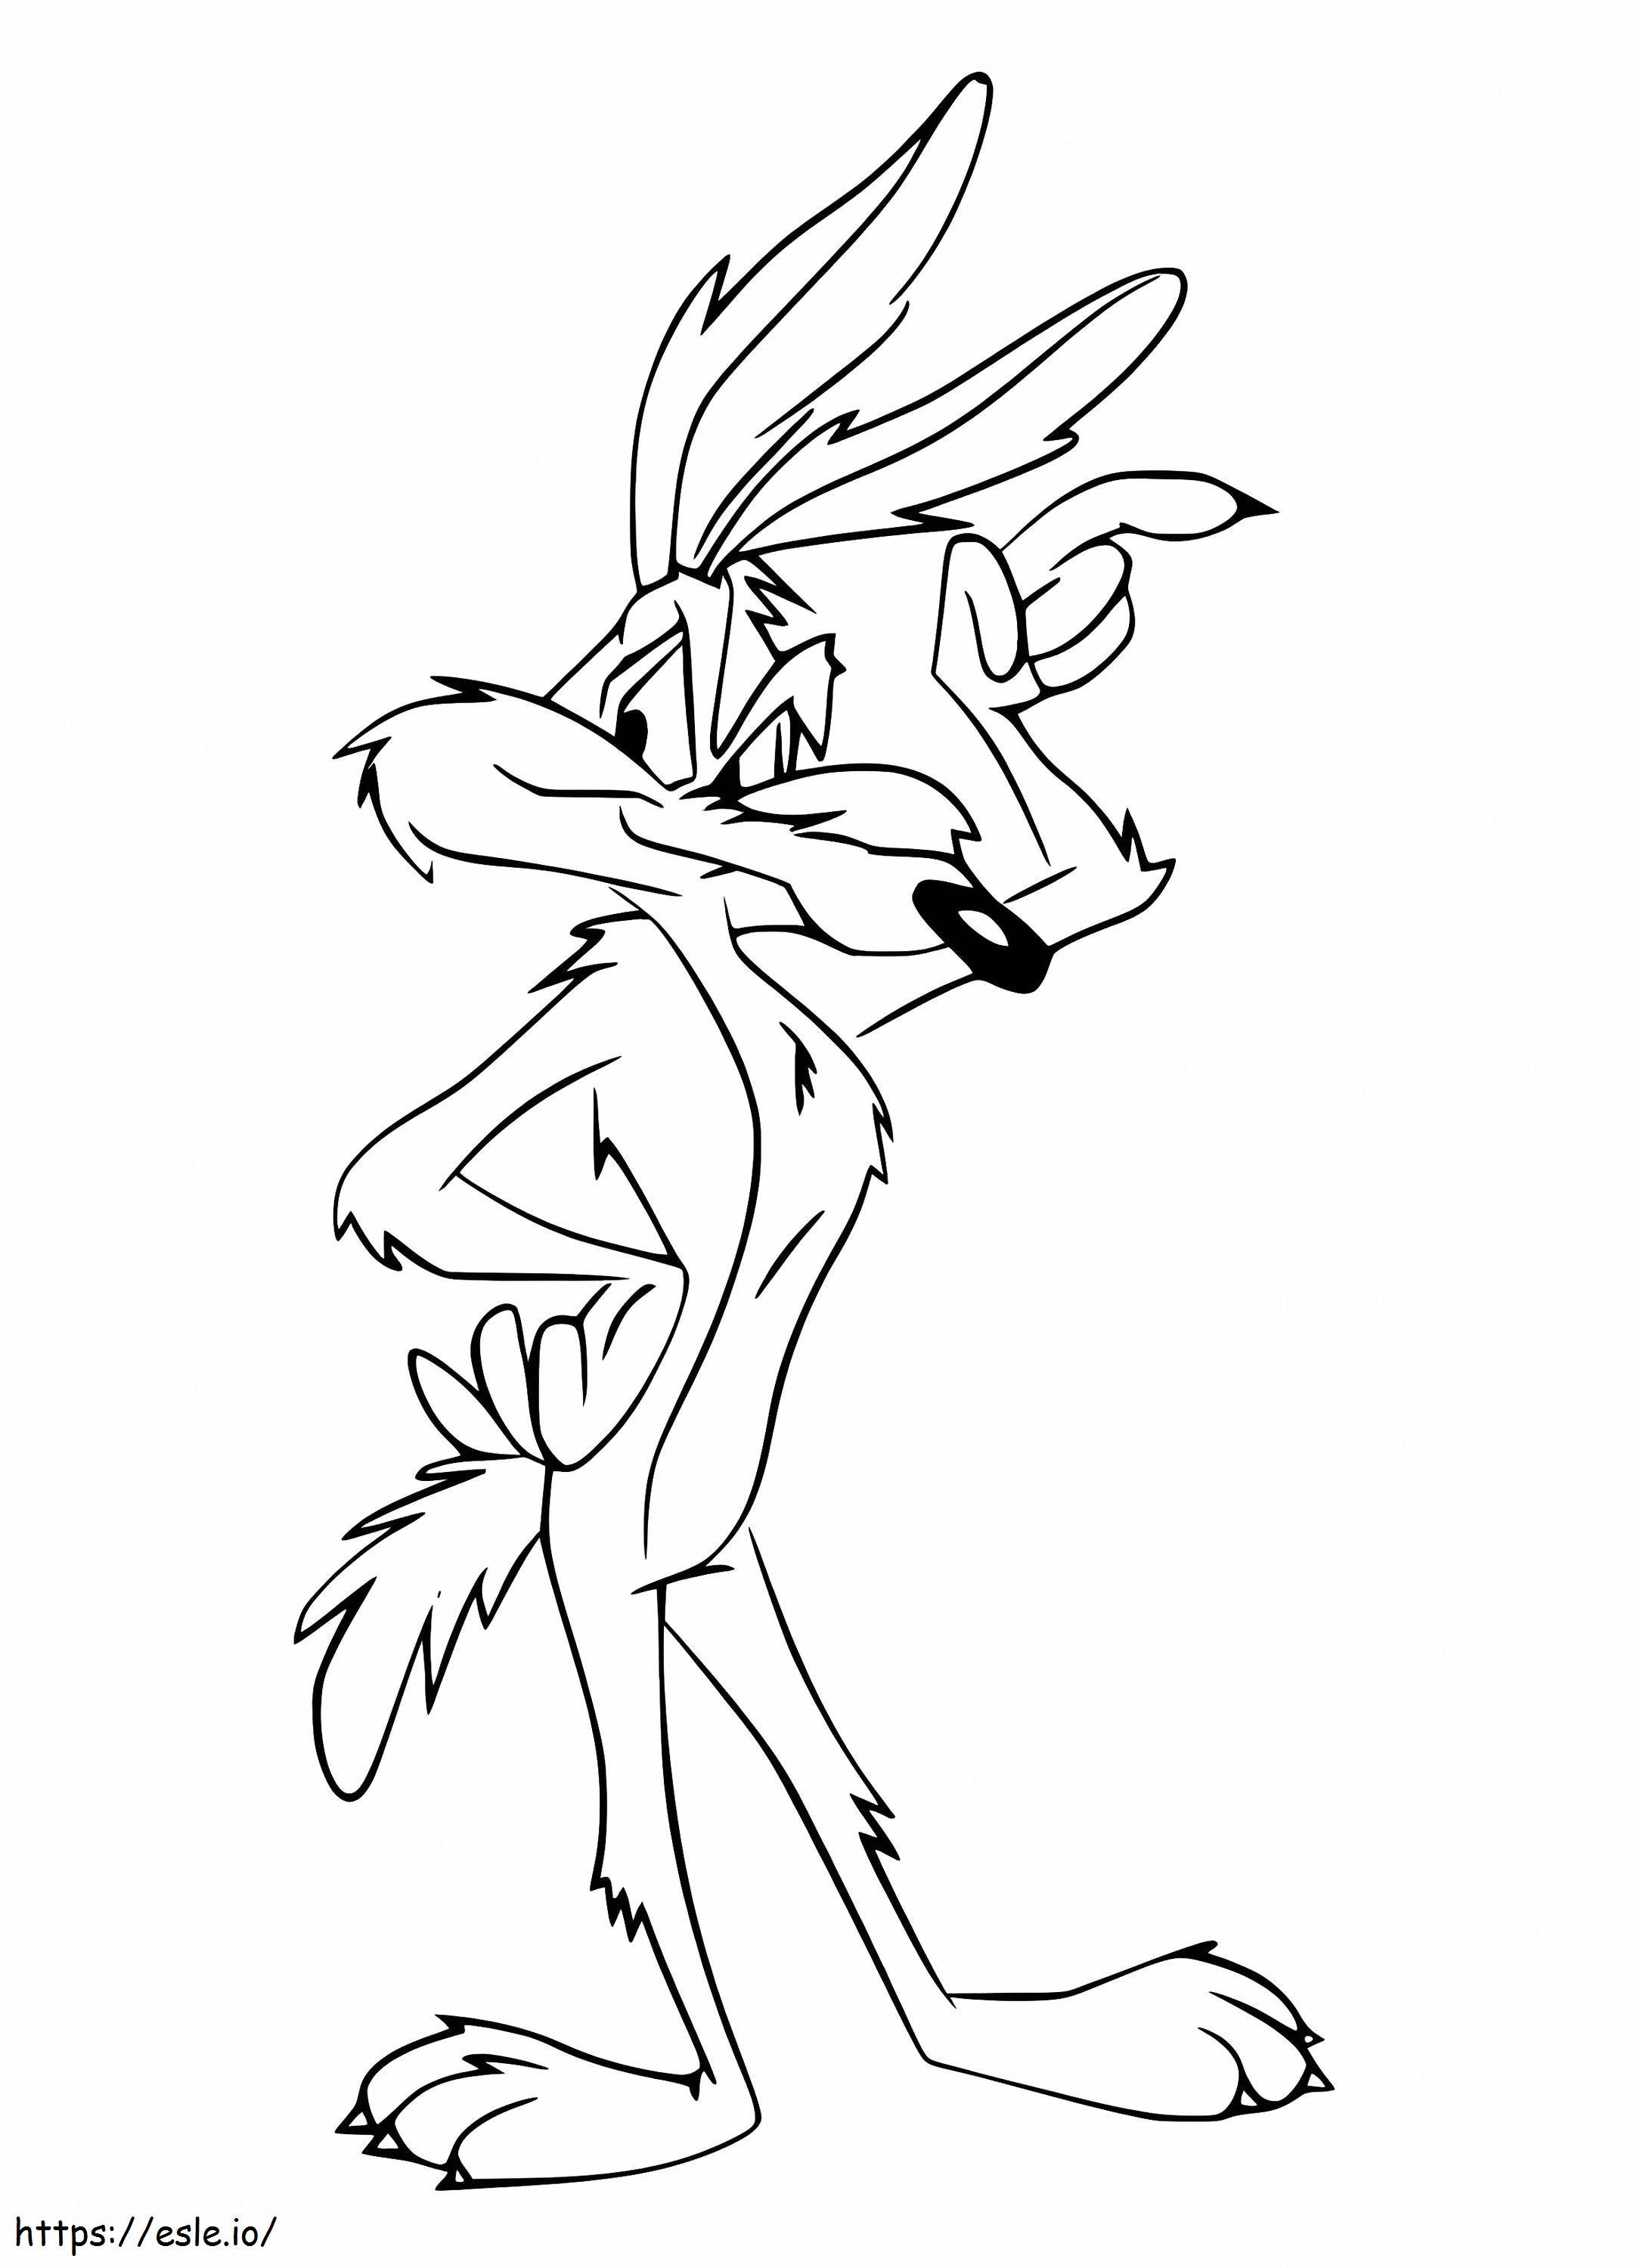 Wile E Coyote Standing coloring page